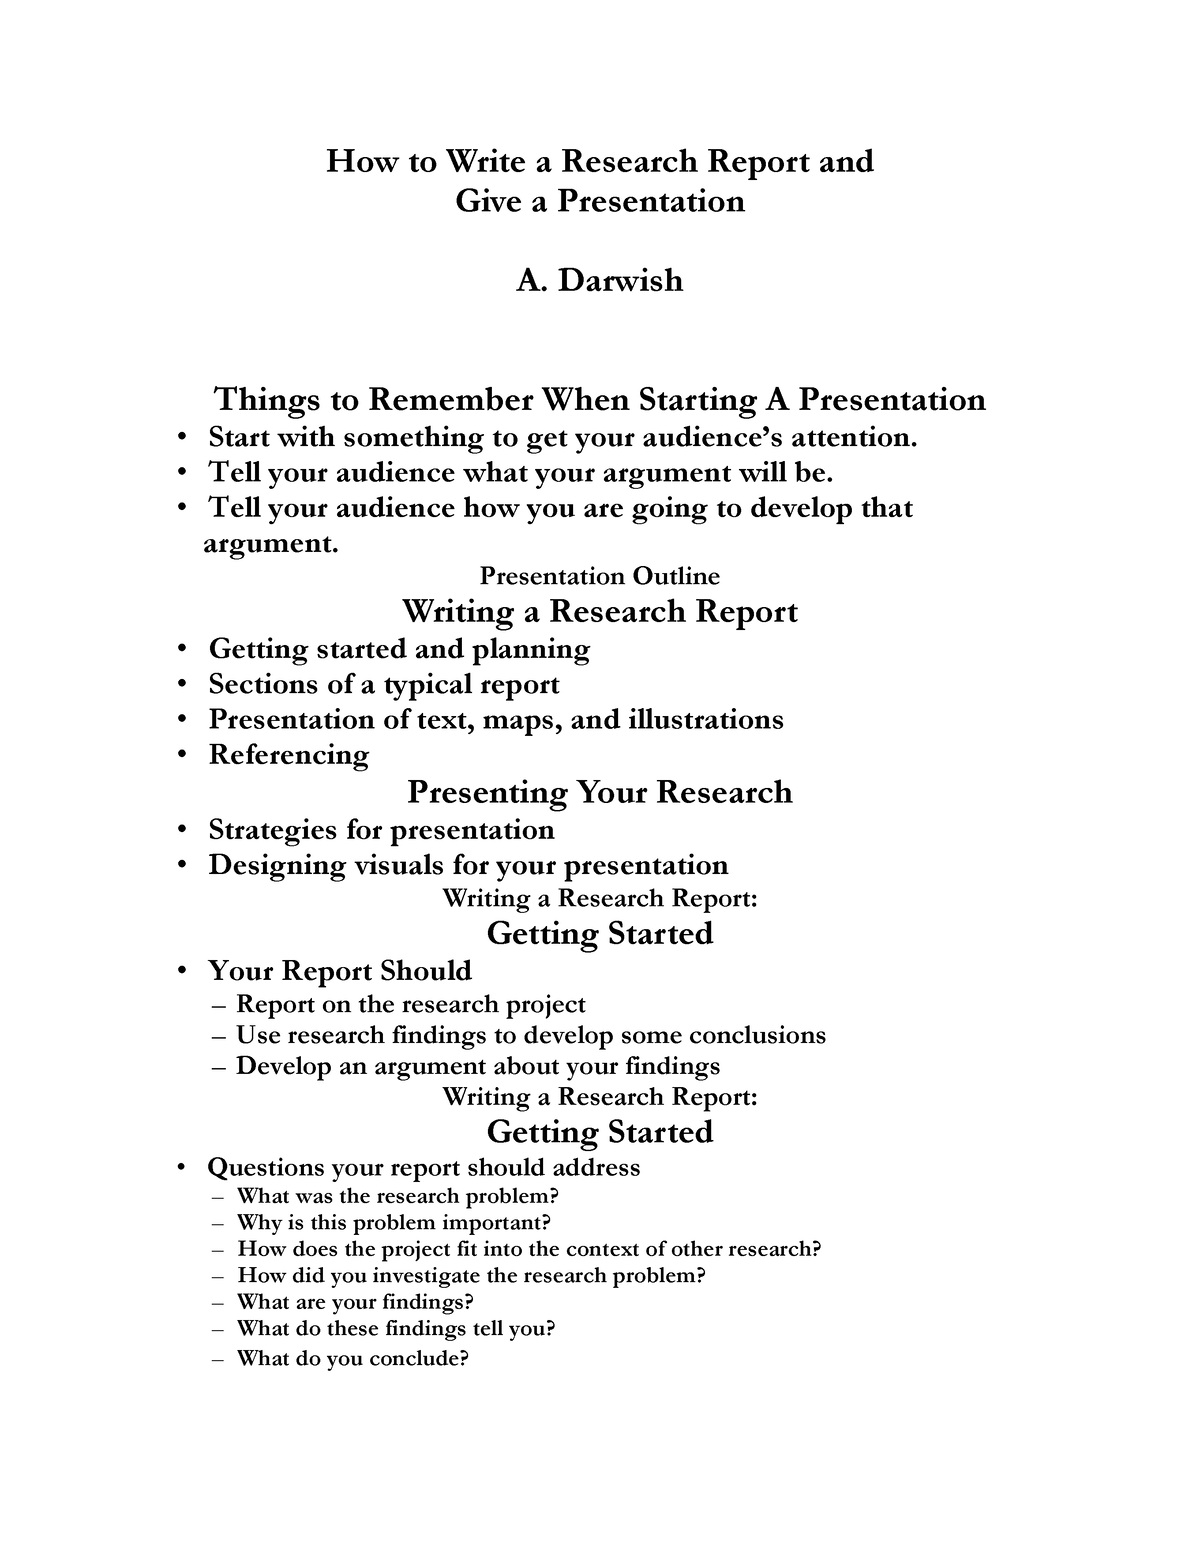 how to write research report and give presentation